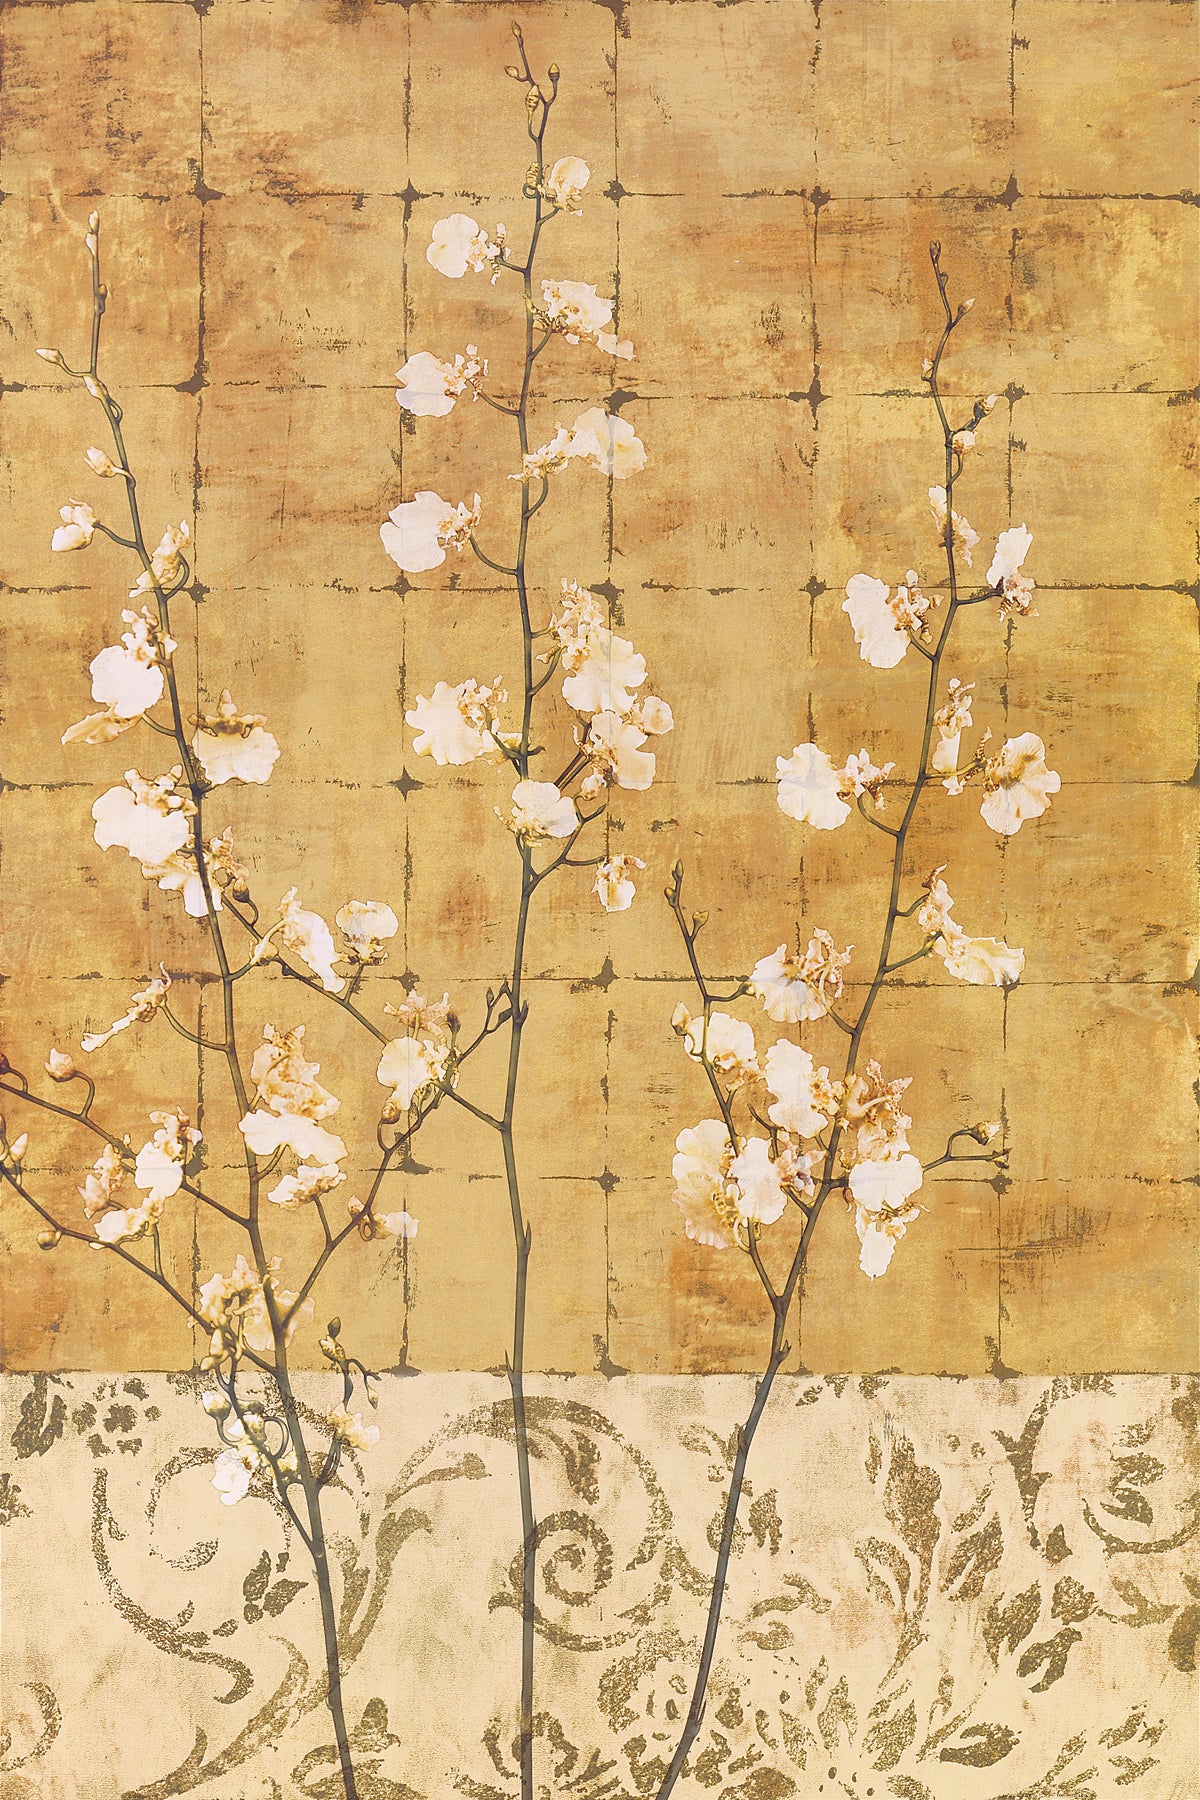 Chris Donovan - Blossoms in Gold II